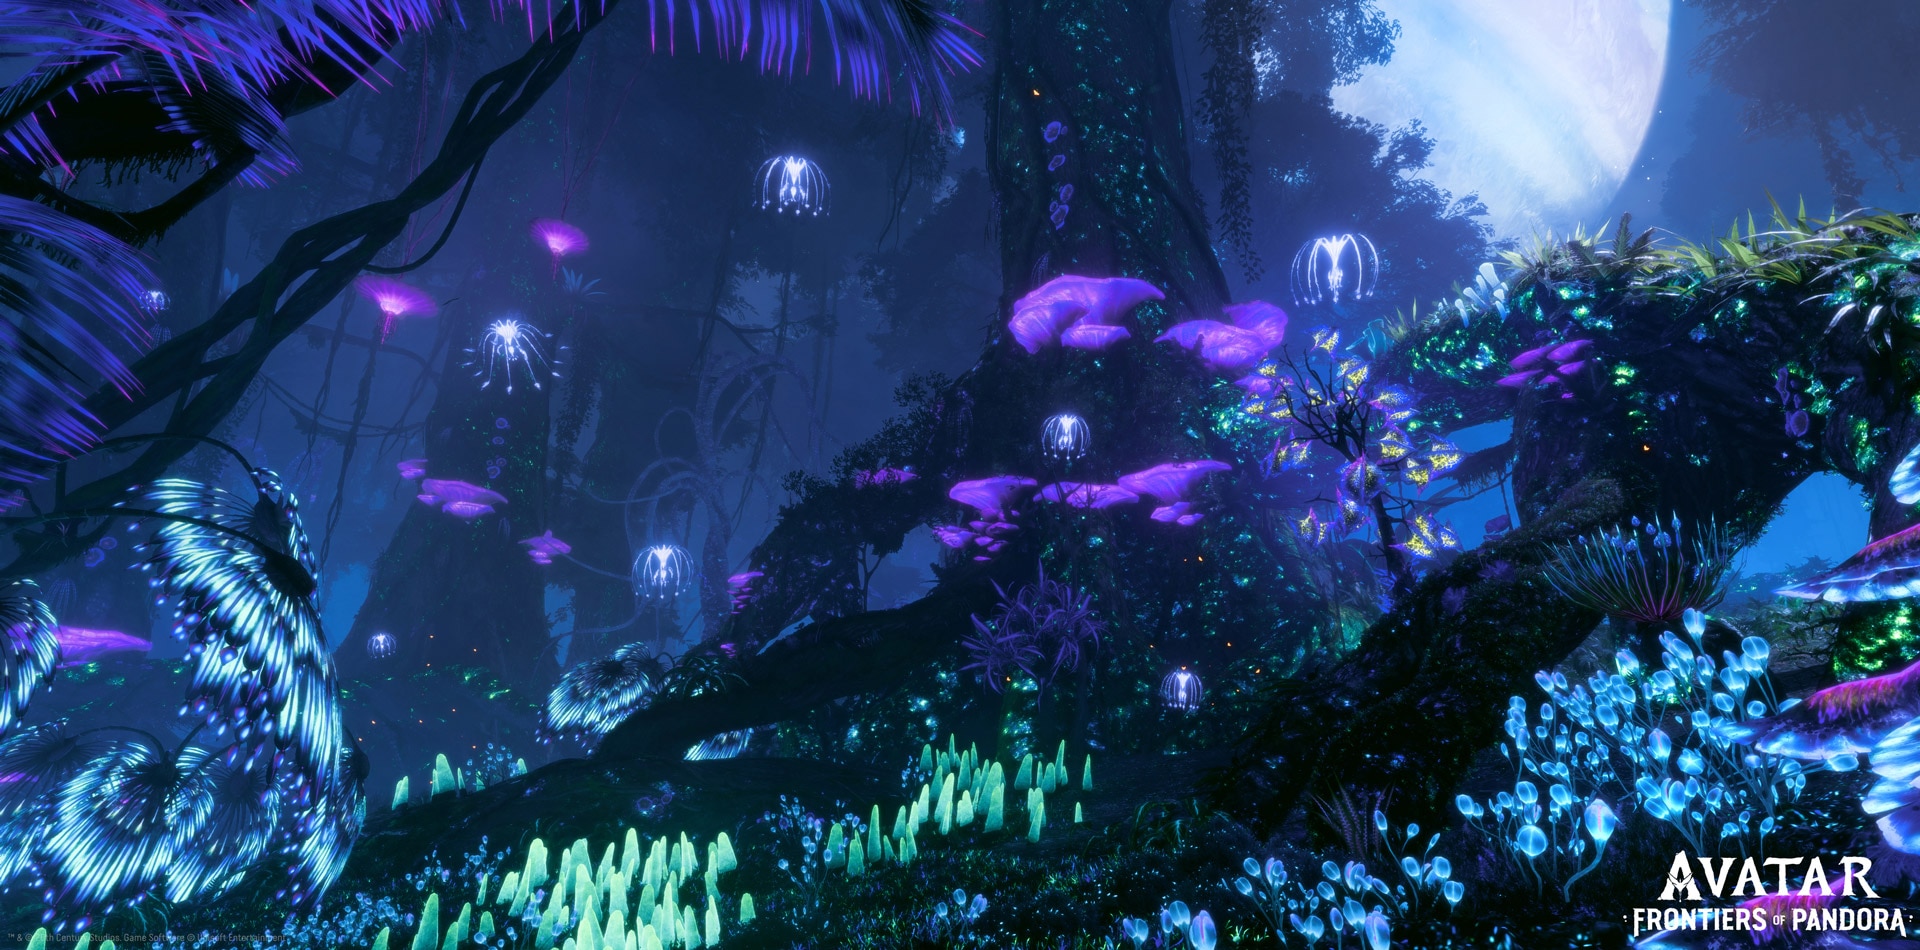 [UN][News] ‘It Was Not the Tech, but the People’ – How Avatar: Frontiers of Pandora Embraces Creativity While Pushing Boundaries of Technology - BIOLEMINESCENCE